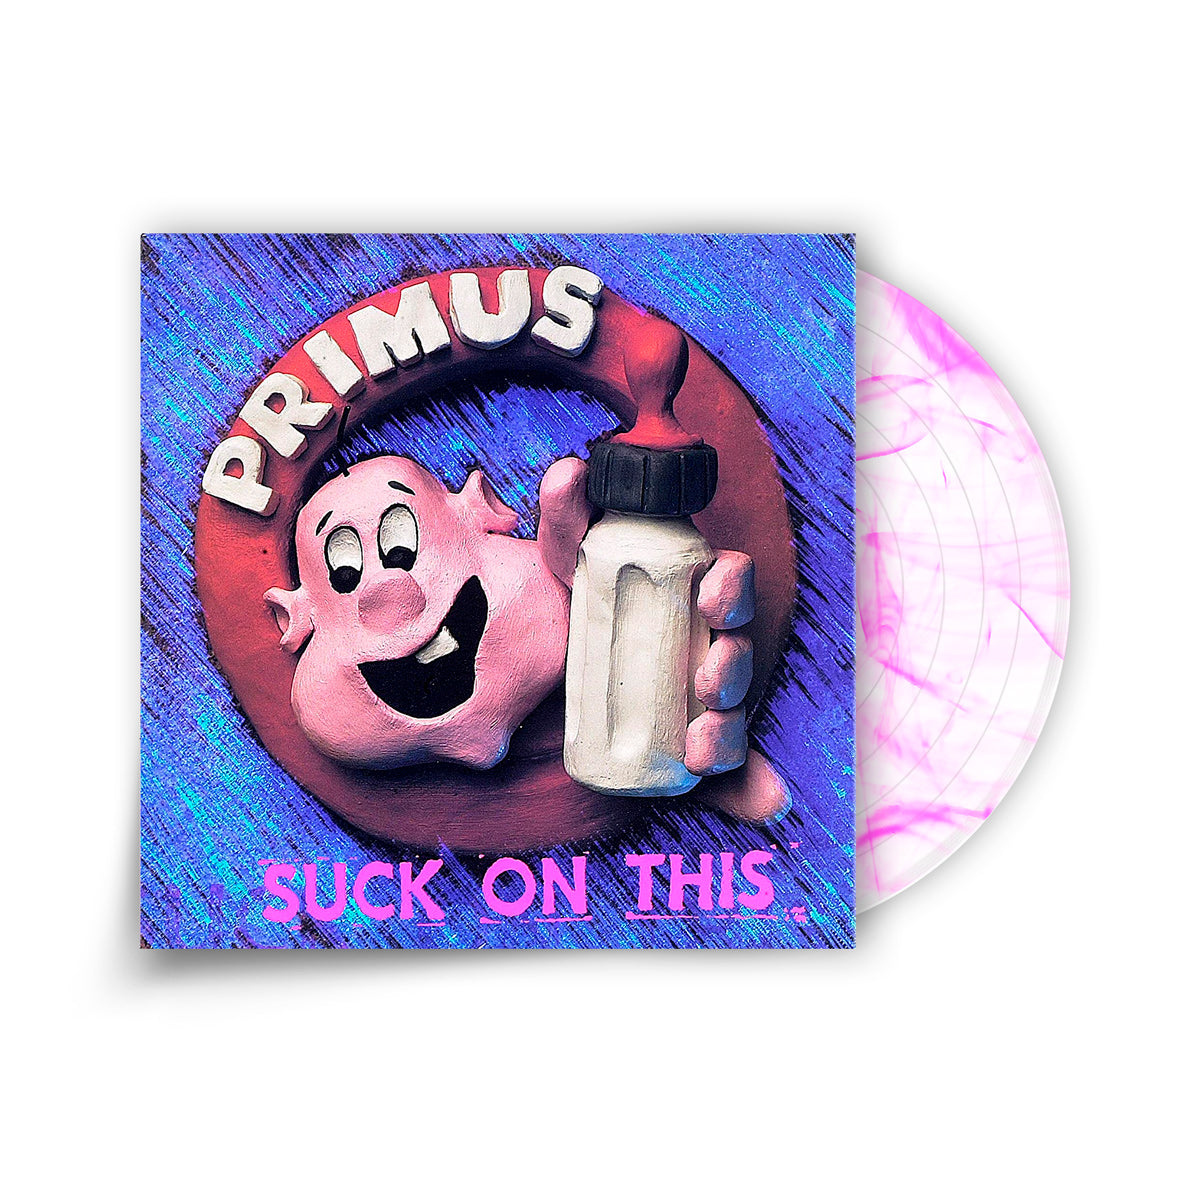 PRIMUS 'FRIZZLE FRY' & 'SUCK ON THIS' LP BUNDLE (Clear w/ Pink Swirls)